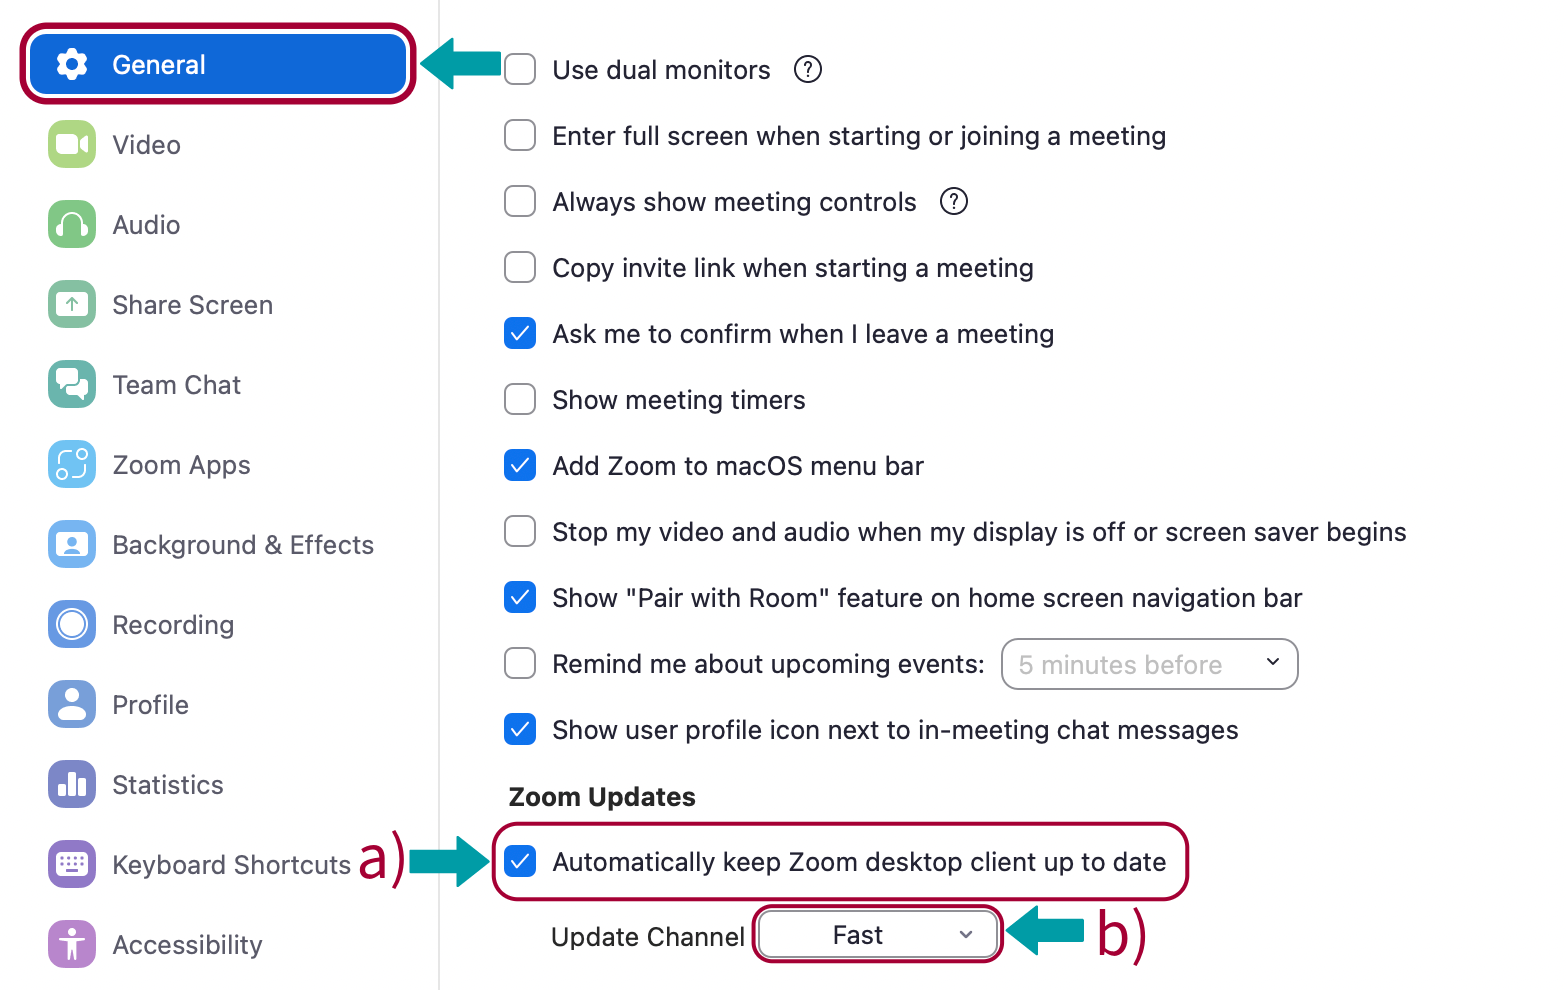 Red box around General tab. Step a) is represented by a red box around  the "automatically keep Zoom up to date" text. Step b) shows a red box around the "Fast" option from the update options.